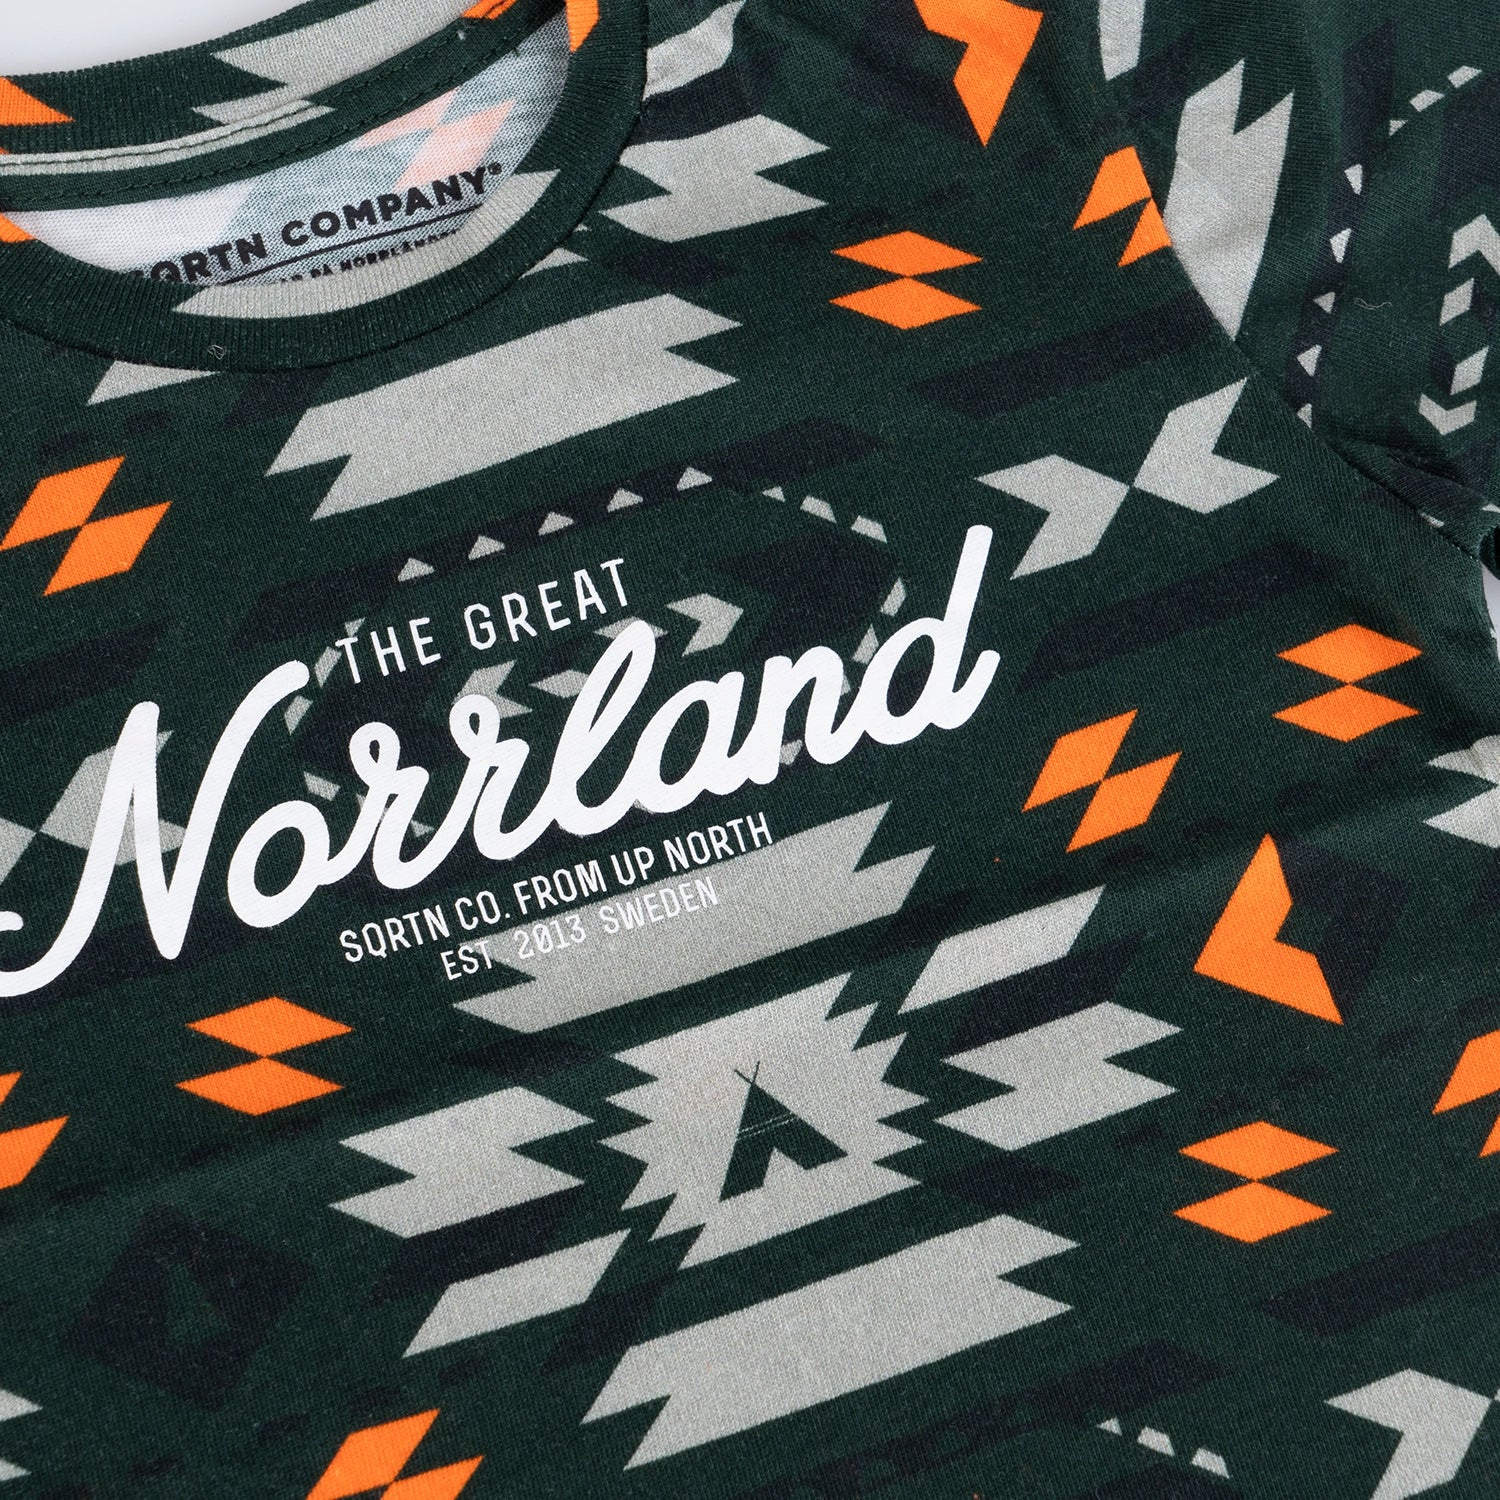 GREAT NORRLAND KIDS T-SHIRT - AZTEC OLIVE